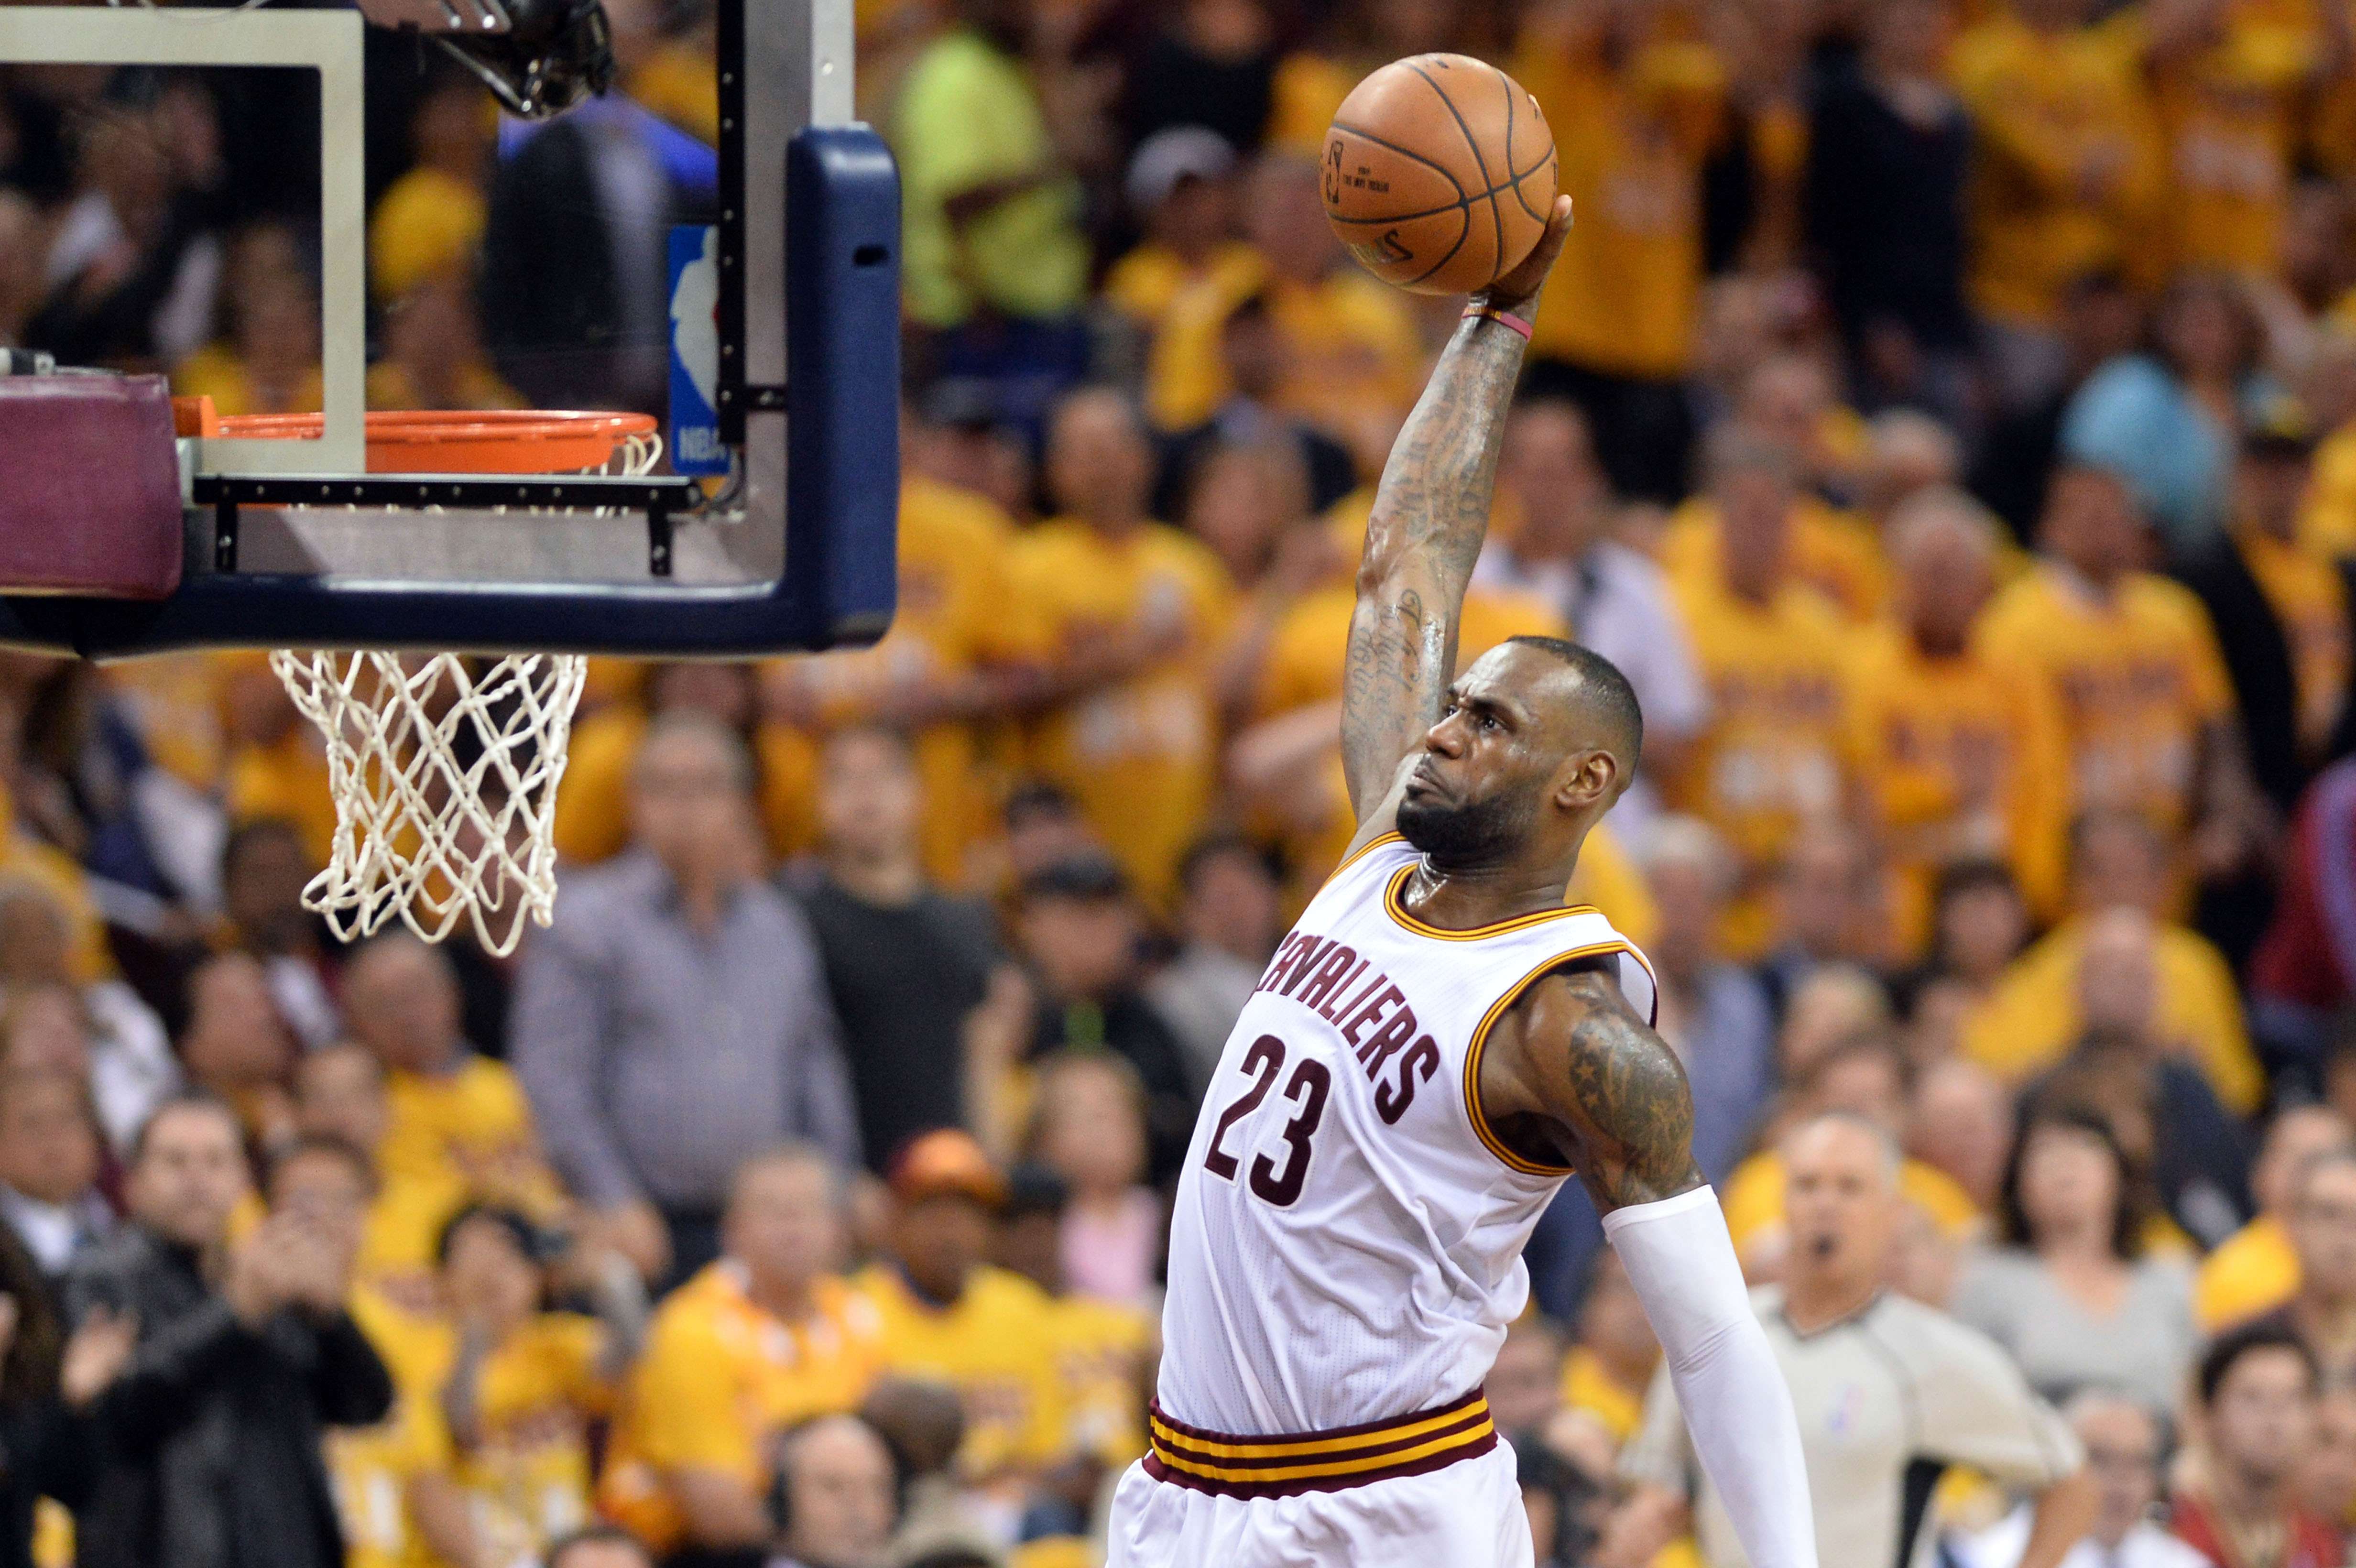 The Cavaliers’ LeBron James slam dunks during the third quarter against the Toronto Raptors in game one. Photo: USA Today